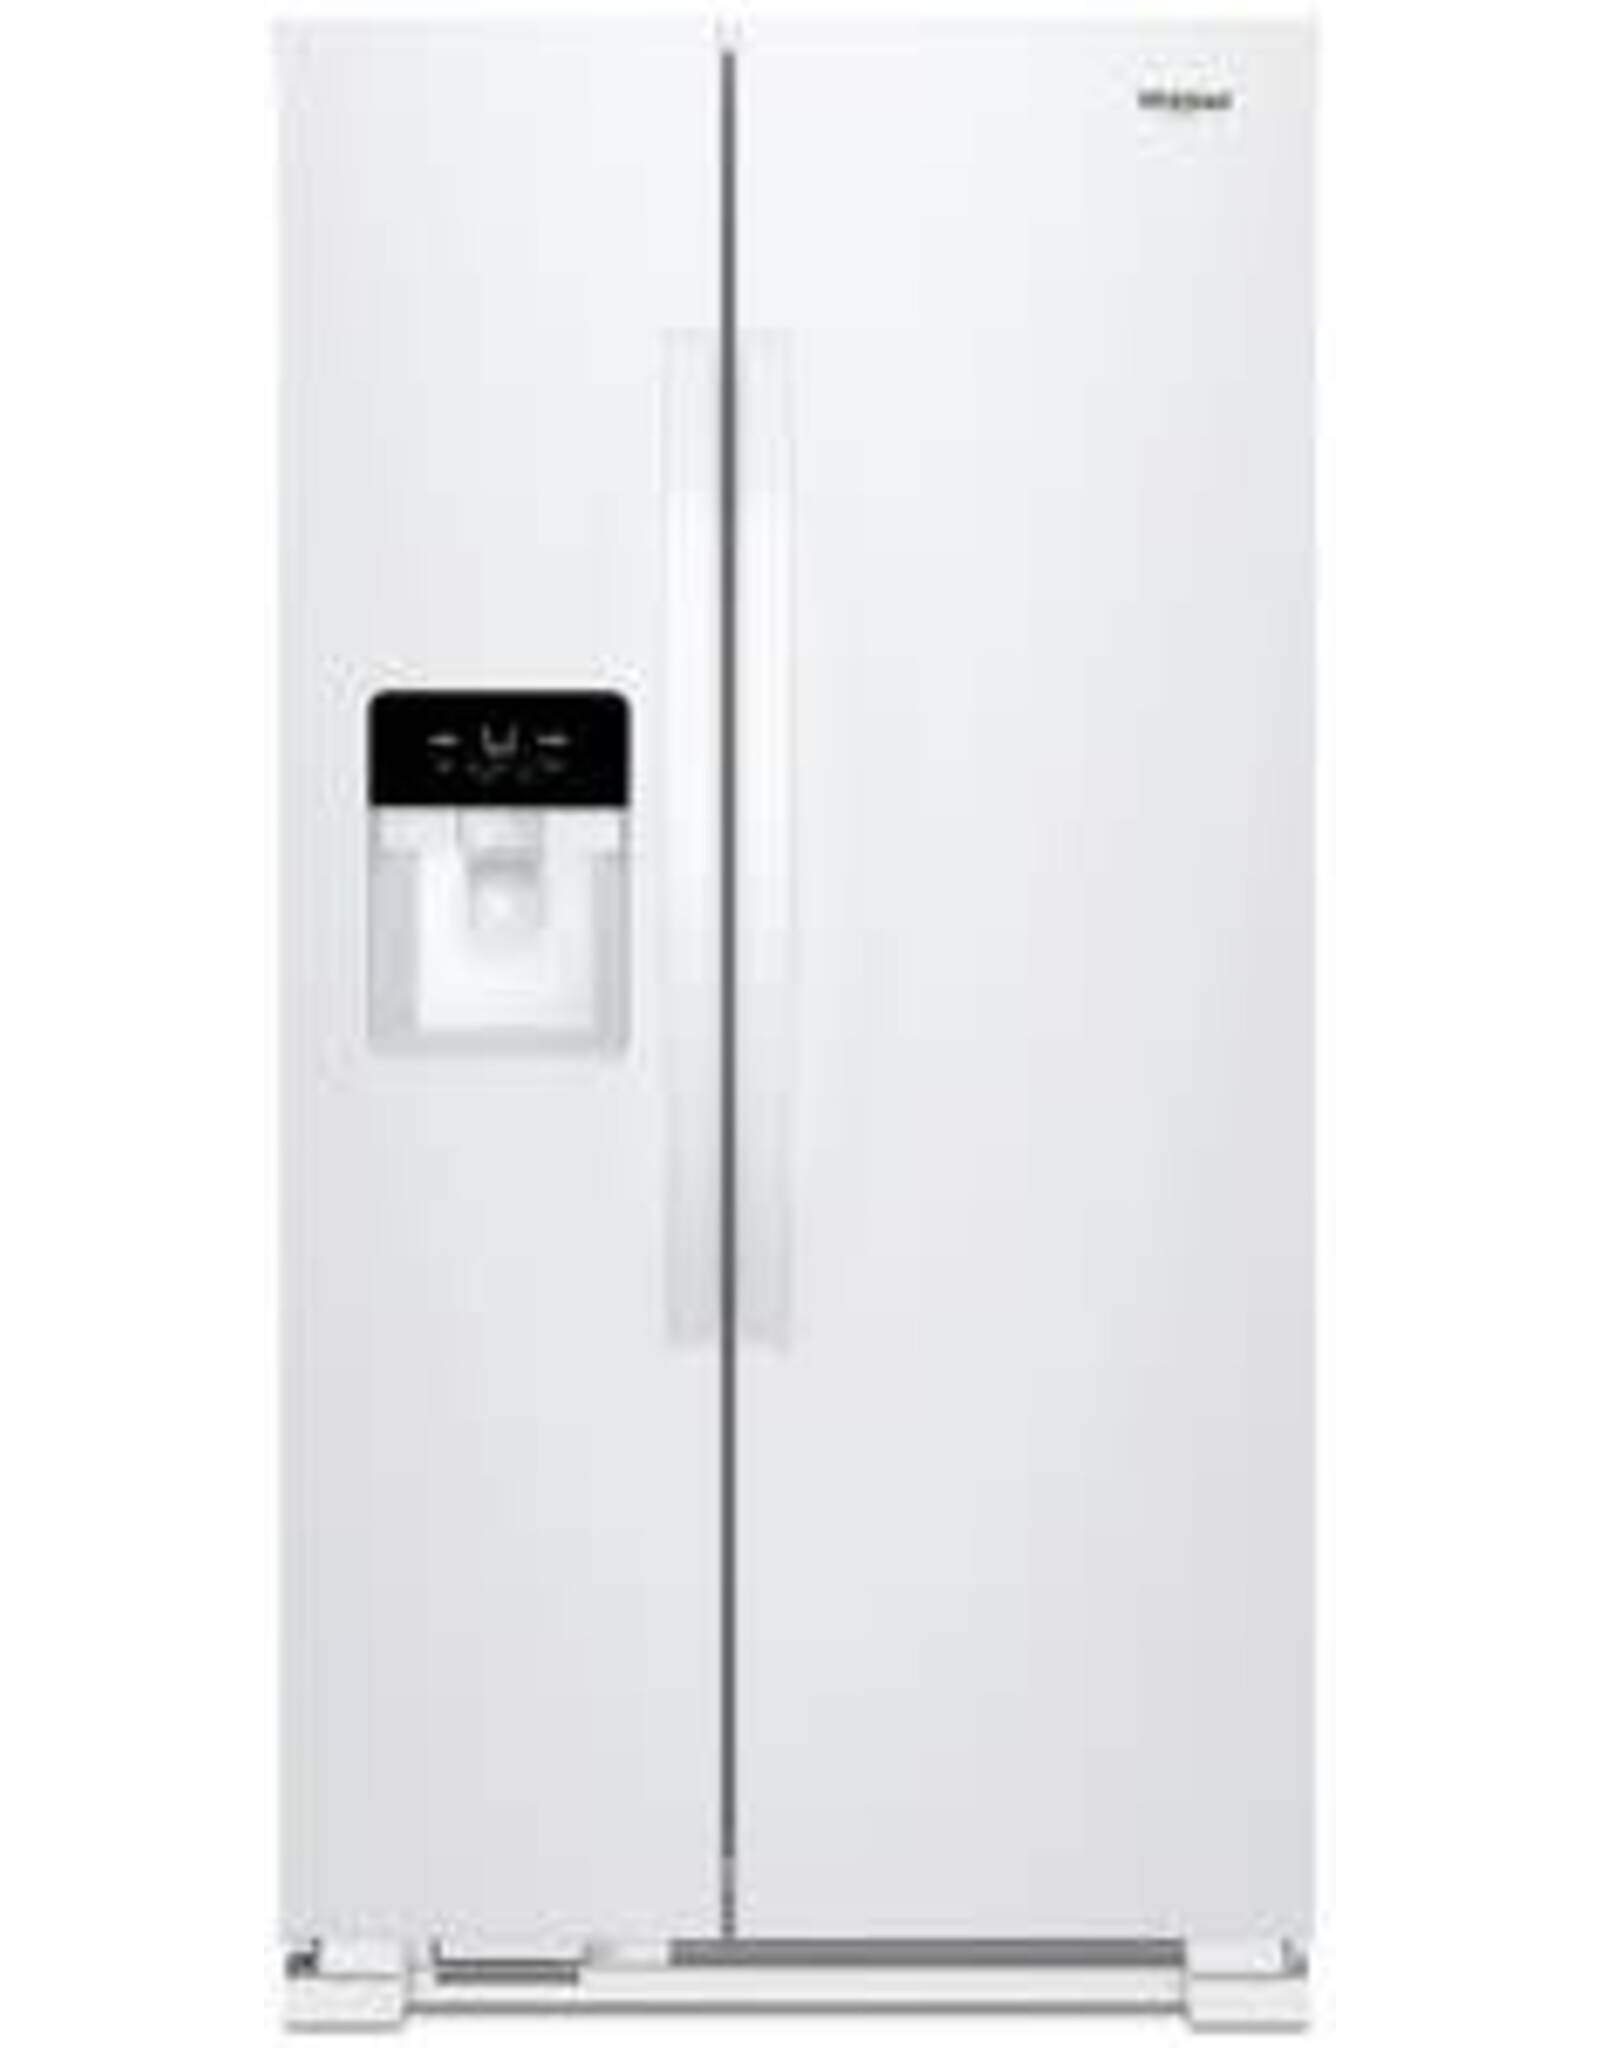 WHIRLPOOL WRS321SDHW 21.4 cu. ft. Side by Side Refrigerator in White